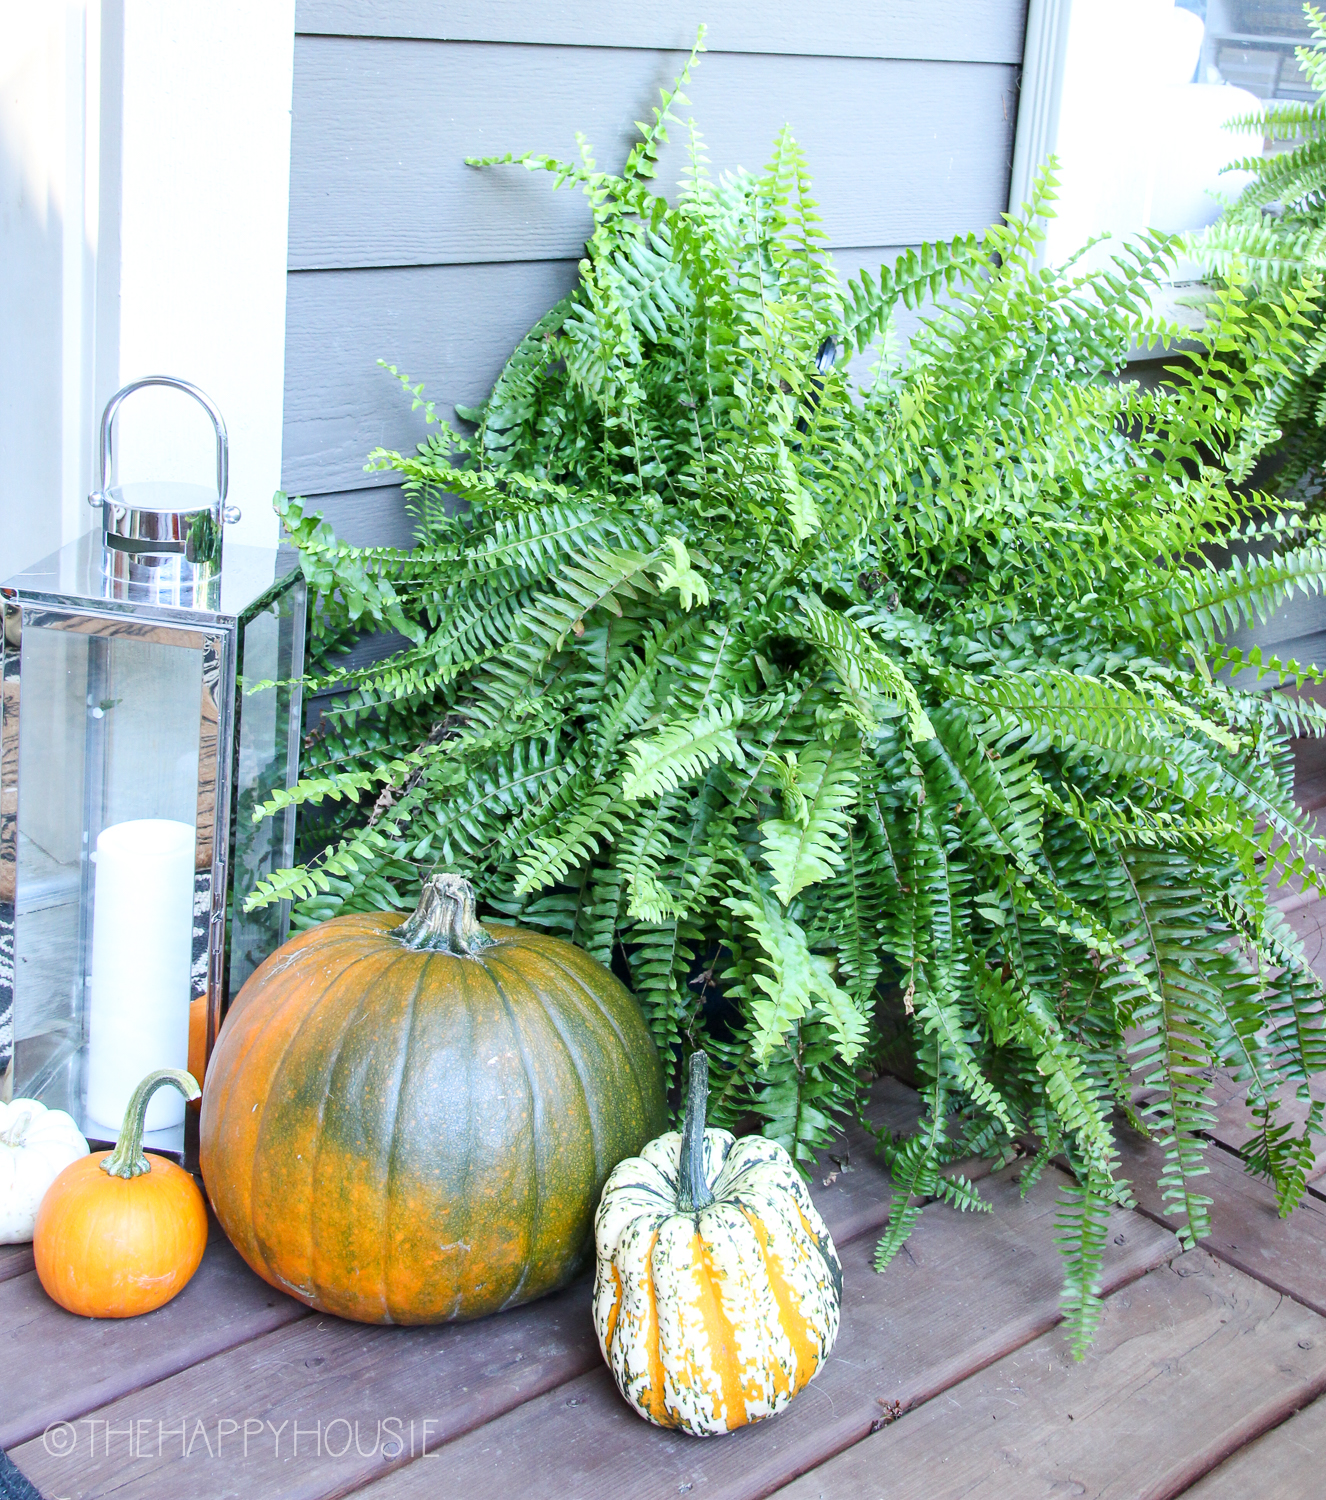 There is a large fern plant beside the pumpkins on the porch.